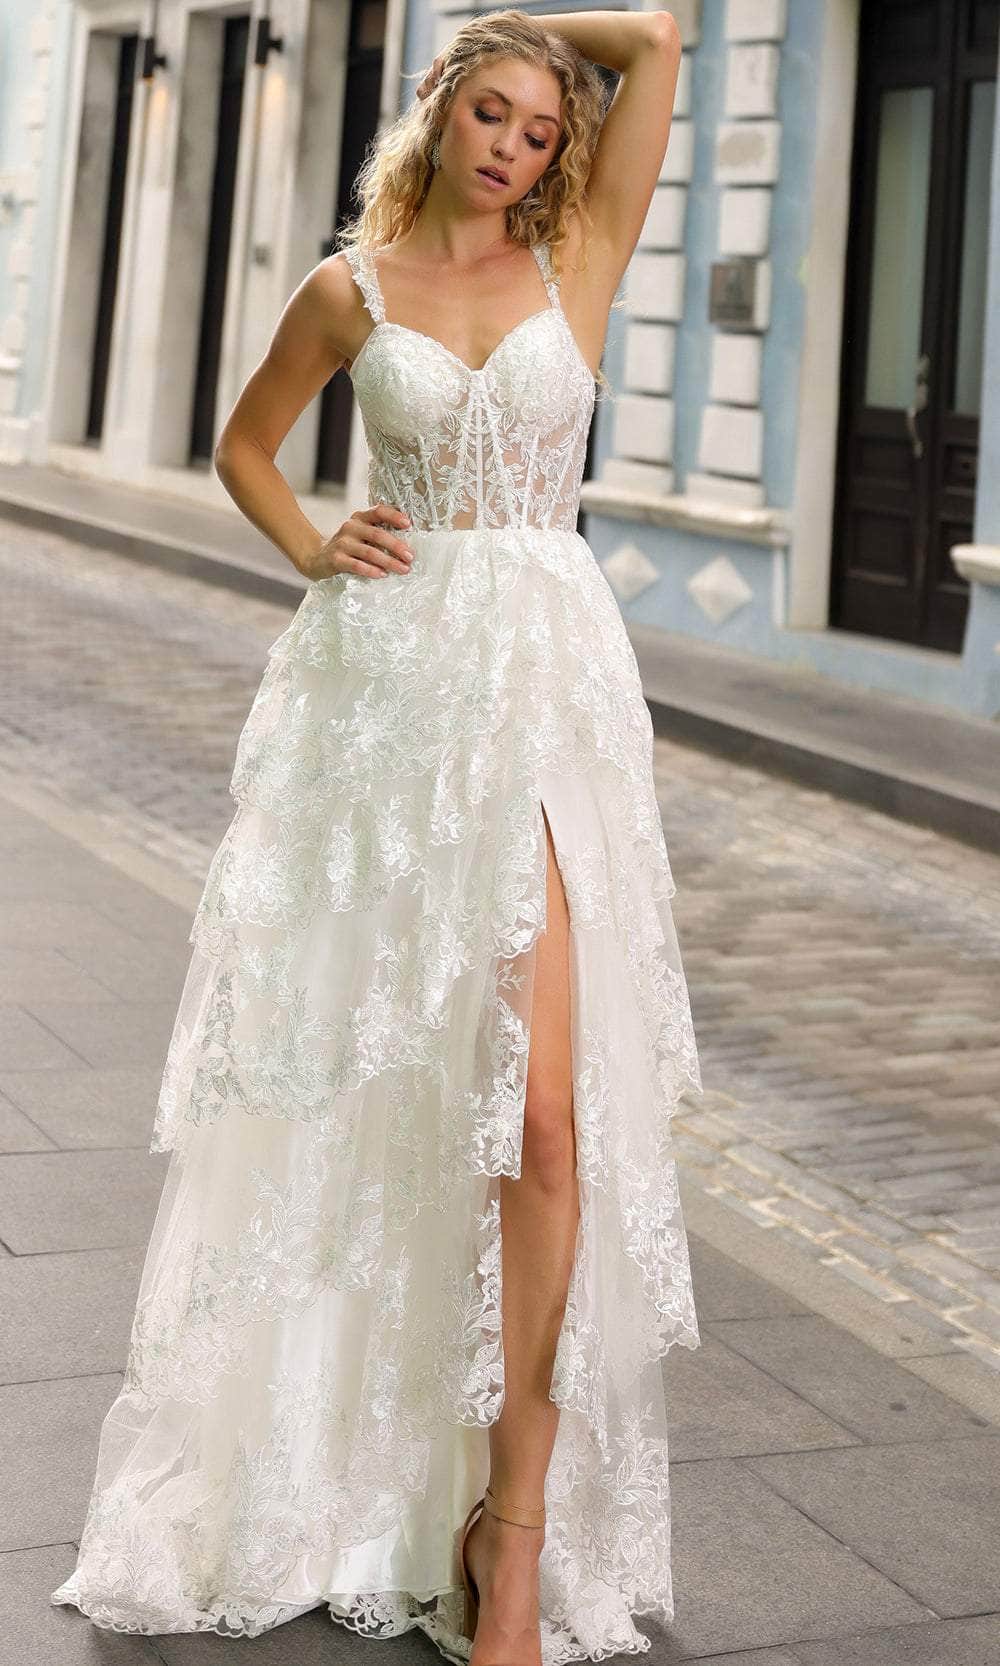 Nox Anabel T1335 - Lace Ornate Prom Dress Special Occasion Dress 0 / White